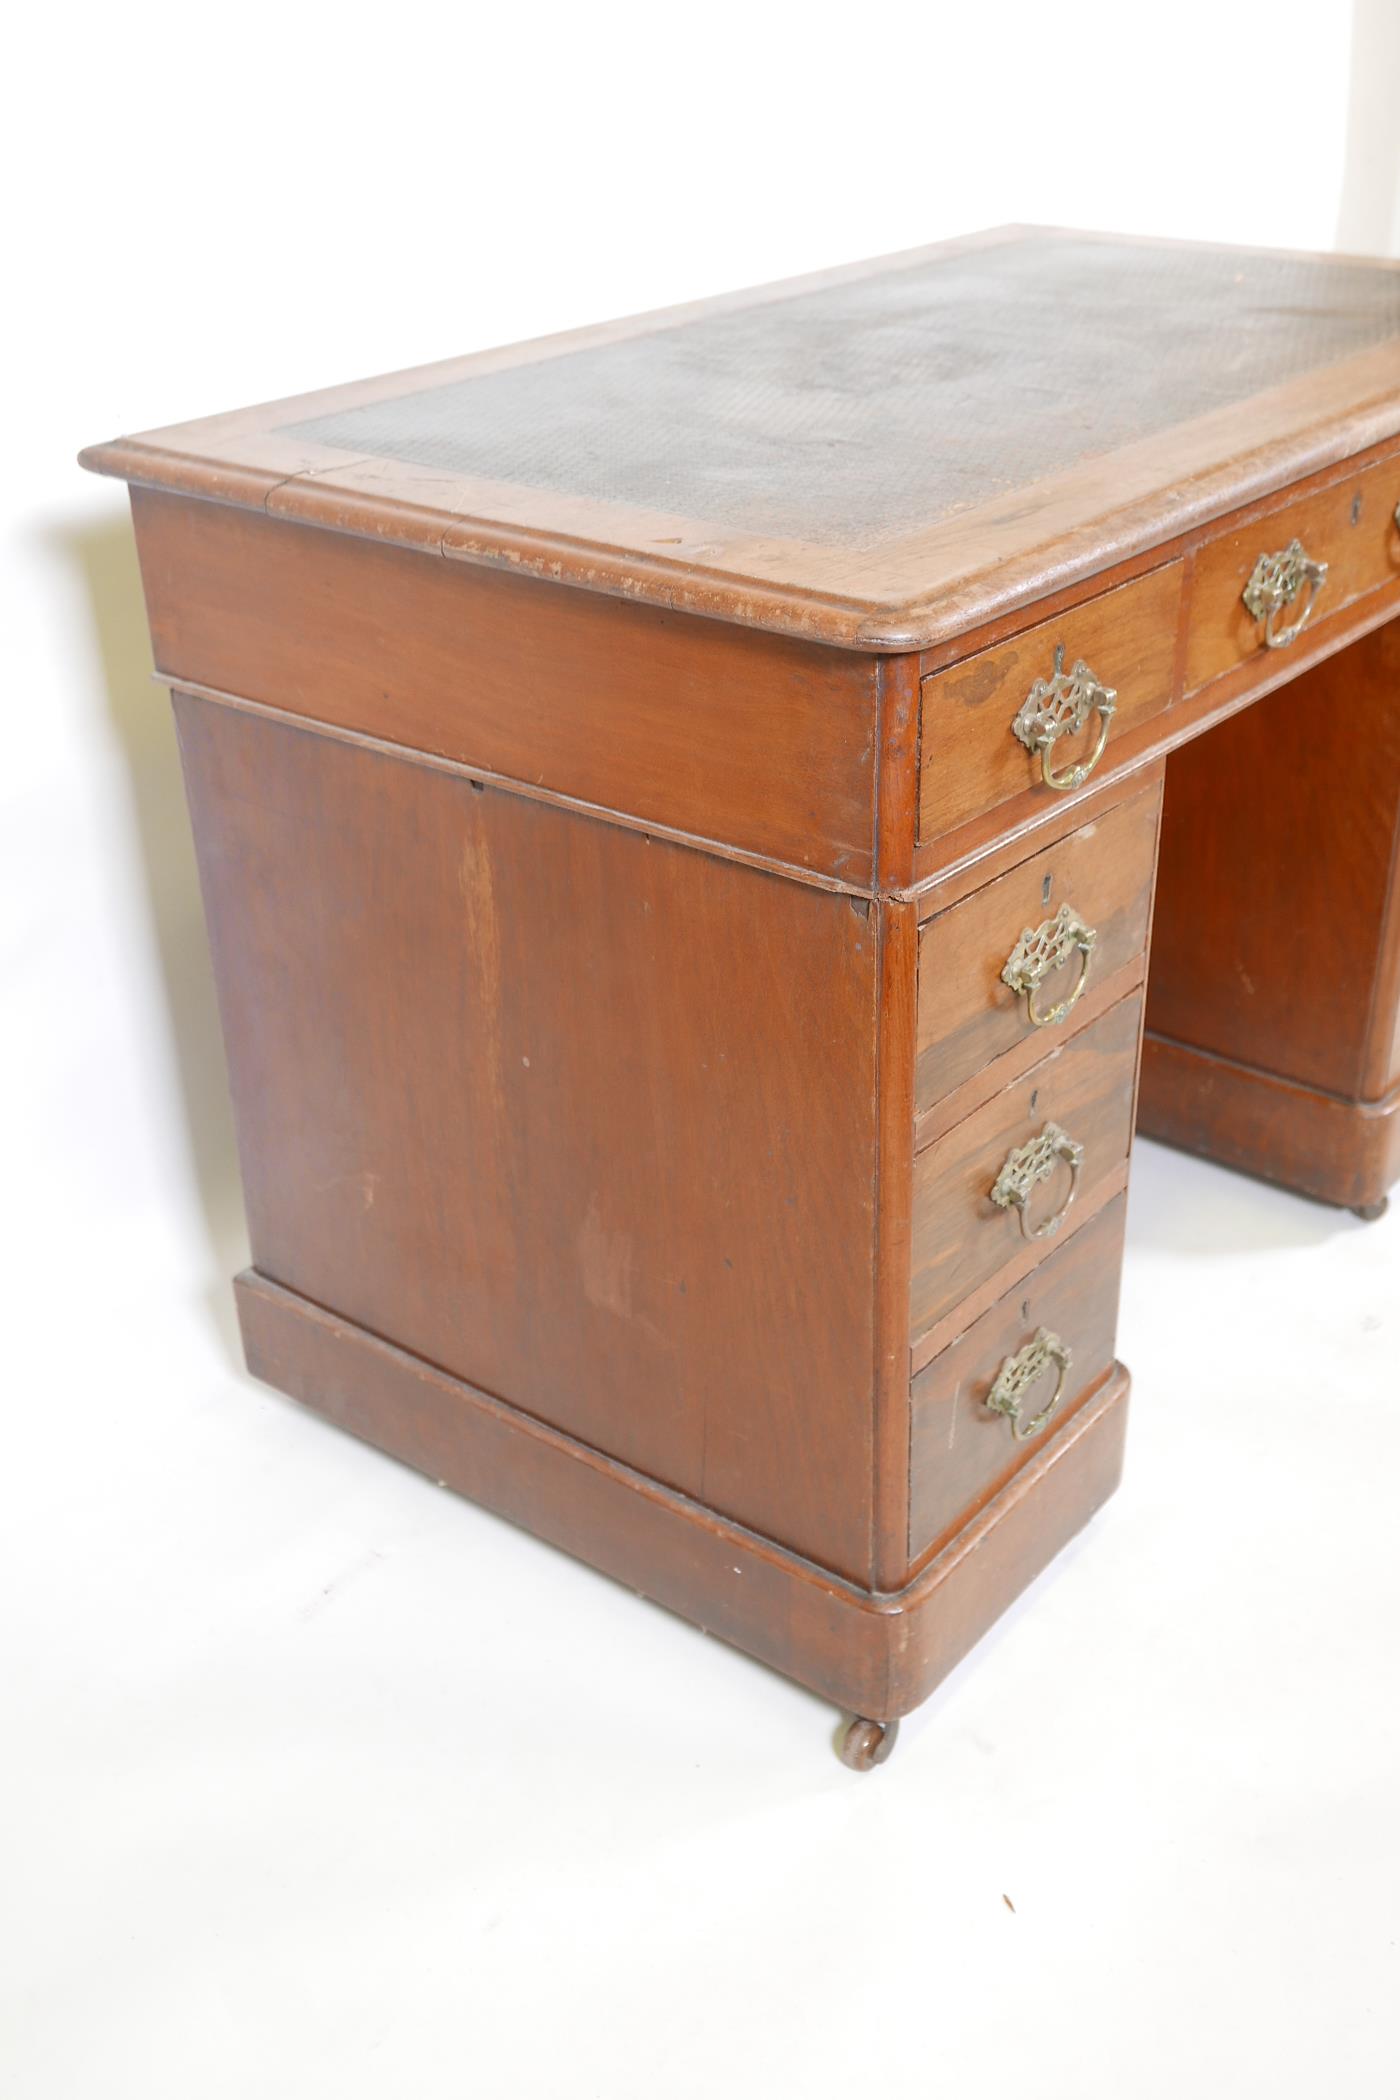 A Victorian walnut pedestal desk with an inset leather top and nine drawers, 40" x 23", 27" high - Image 5 of 6